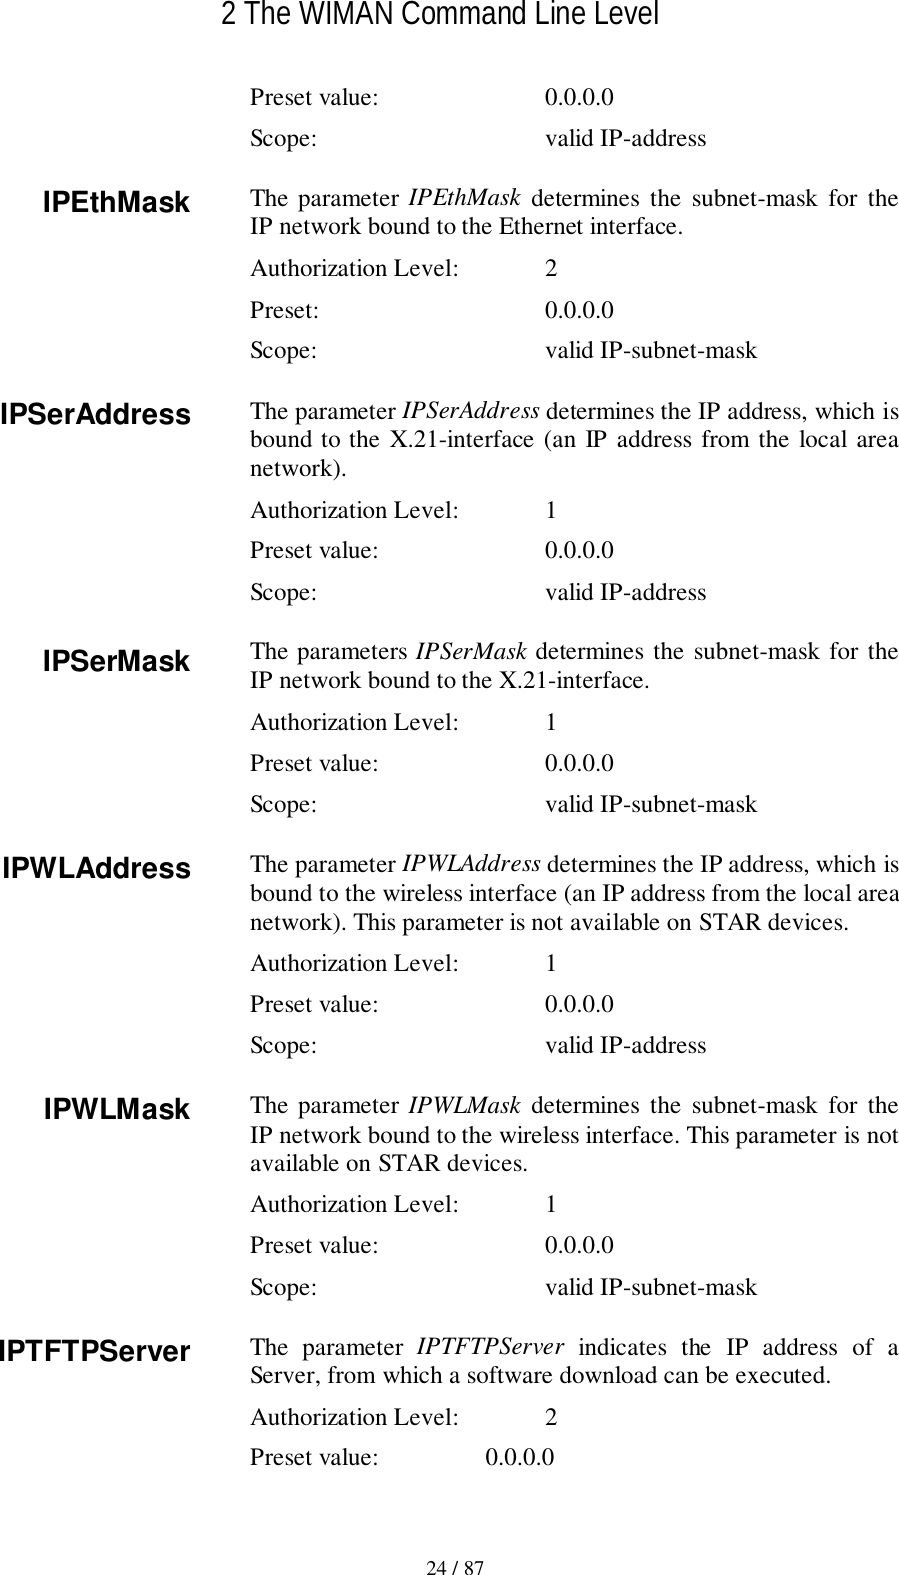 2 The WIMAN Command Line Level24 / 87Preset value: 0.0.0.0Scope: valid IP-addressThe parameter IPEthMask determines the subnet-mask for theIP network bound to the Ethernet interface.Authorization Level: 2Preset: 0.0.0.0Scope: valid IP-subnet-maskThe parameter IPSerAddress determines the IP address, which isbound to the X.21-interface (an IP address from the local areanetwork).Authorization Level: 1Preset value: 0.0.0.0Scope: valid IP-addressThe parameters IPSerMask determines the subnet-mask for theIP network bound to the X.21-interface.Authorization Level: 1Preset value: 0.0.0.0Scope: valid IP-subnet-maskThe parameter IPWLAddress determines the IP address, which isbound to the wireless interface (an IP address from the local areanetwork). This parameter is not available on STAR devices.Authorization Level: 1Preset value: 0.0.0.0Scope: valid IP-addressThe parameter IPWLMask determines the subnet-mask for theIP network bound to the wireless interface. This parameter is notavailable on STAR devices.Authorization Level: 1Preset value: 0.0.0.0Scope: valid IP-subnet-maskThe parameter IPTFTPServer indicates the IP address of aServer, from which a software download can be executed.Authorization Level: 2Preset value: 0.0.0.0IPEthMaskIPSerAddressIPSerMaskIPWLAddressIPWLMaskIPTFTPServer